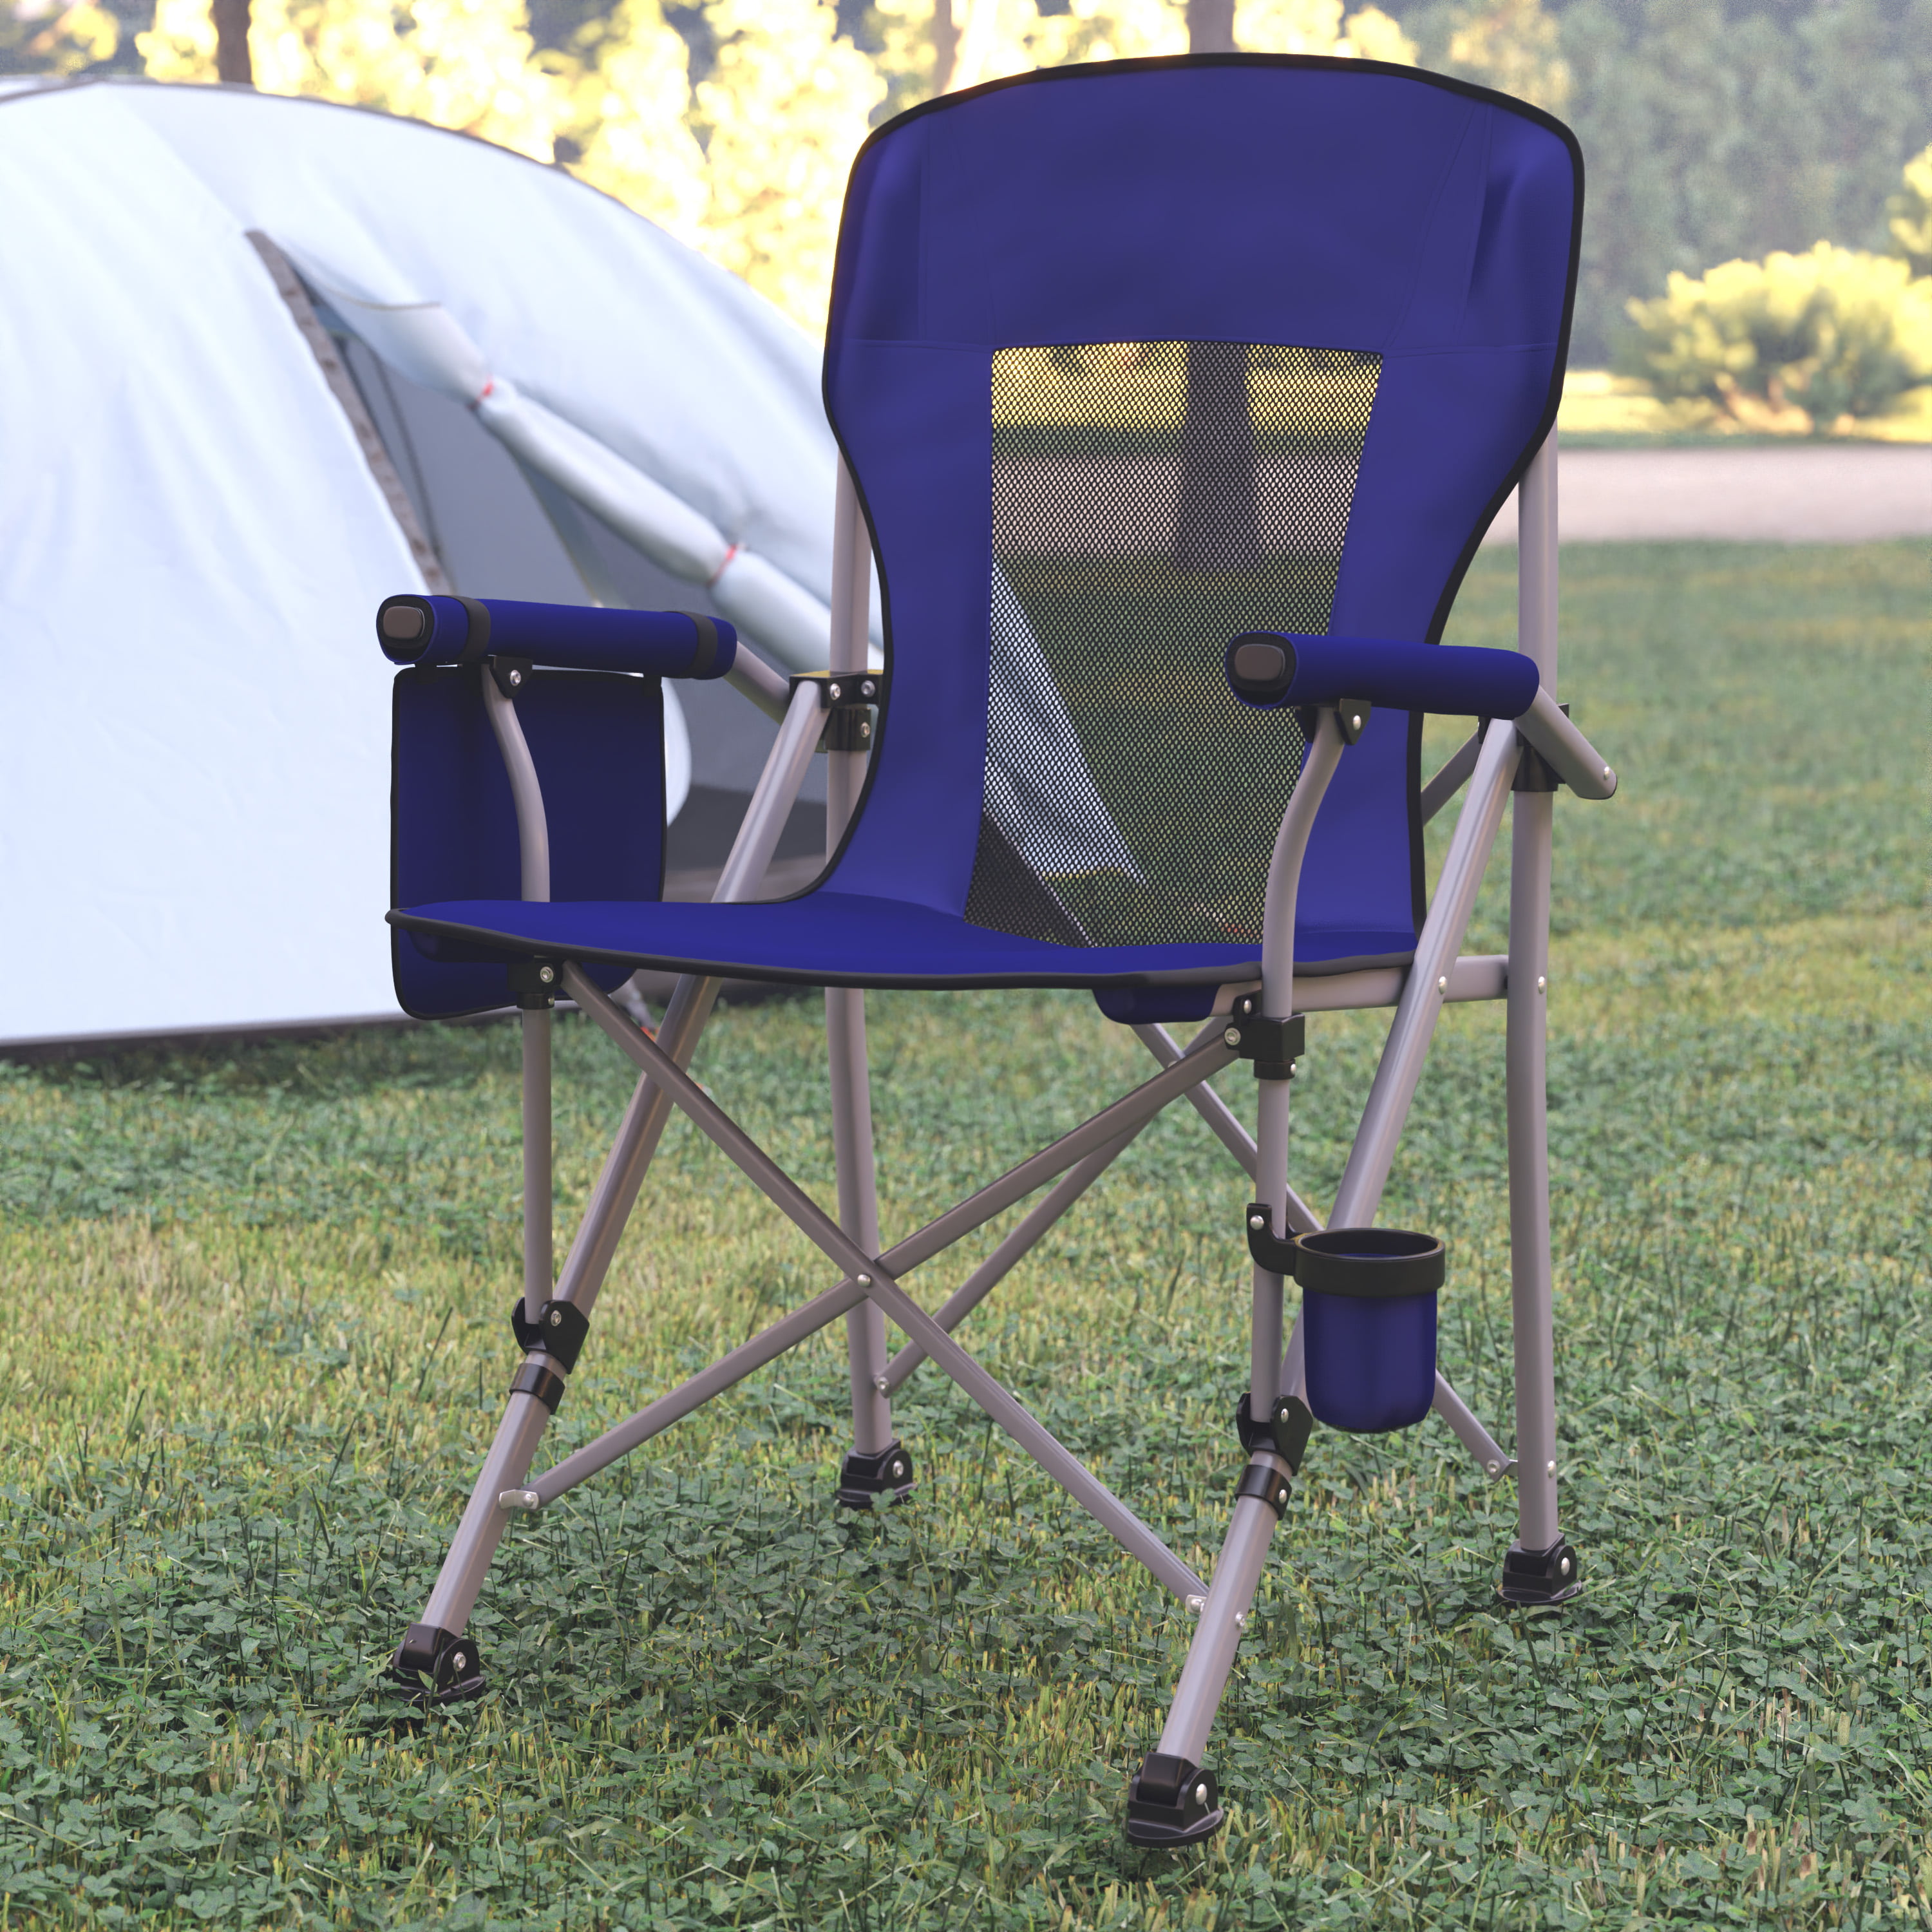 HEAVY DUTY DIRECTOR CHAIR WITH SIDE TABLE GARDEN CAMPING HIKING FISHING FESTIVAL 